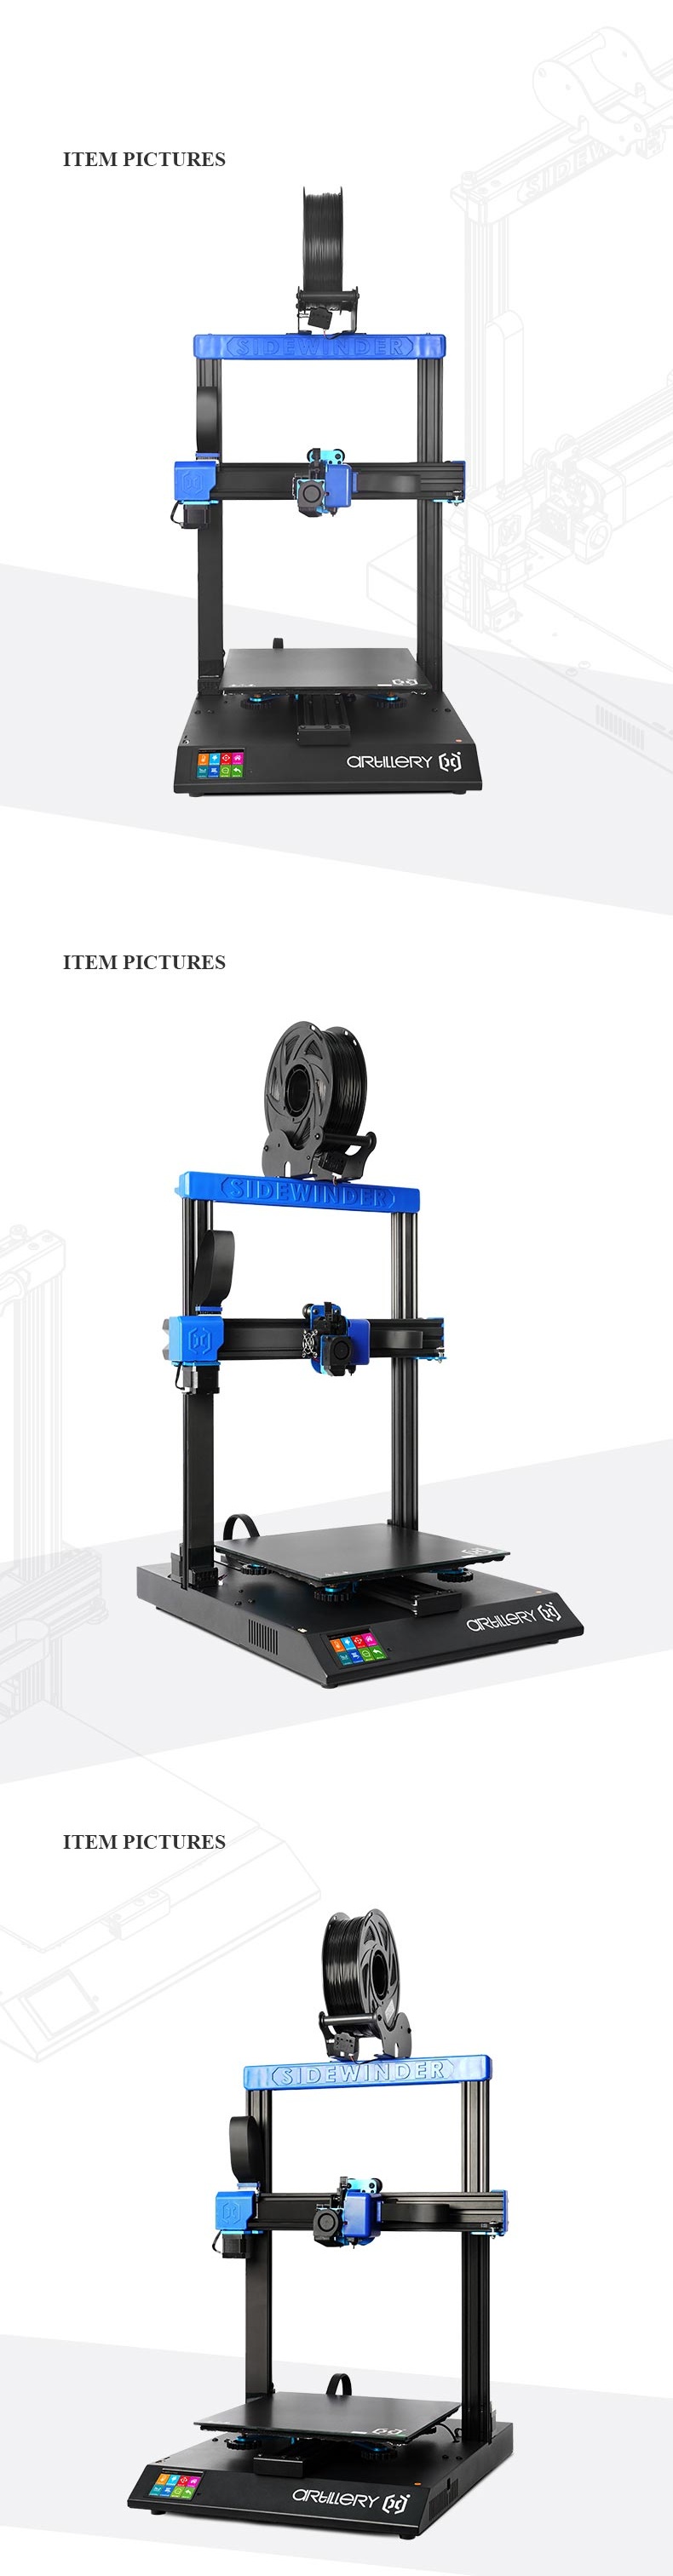 Artillery® X2 3D Printer Kit with 300*300*400mm Large Print Size Support Resume Printing&Filament Runout Detection With Dual Z axis/TFT Touch Screen